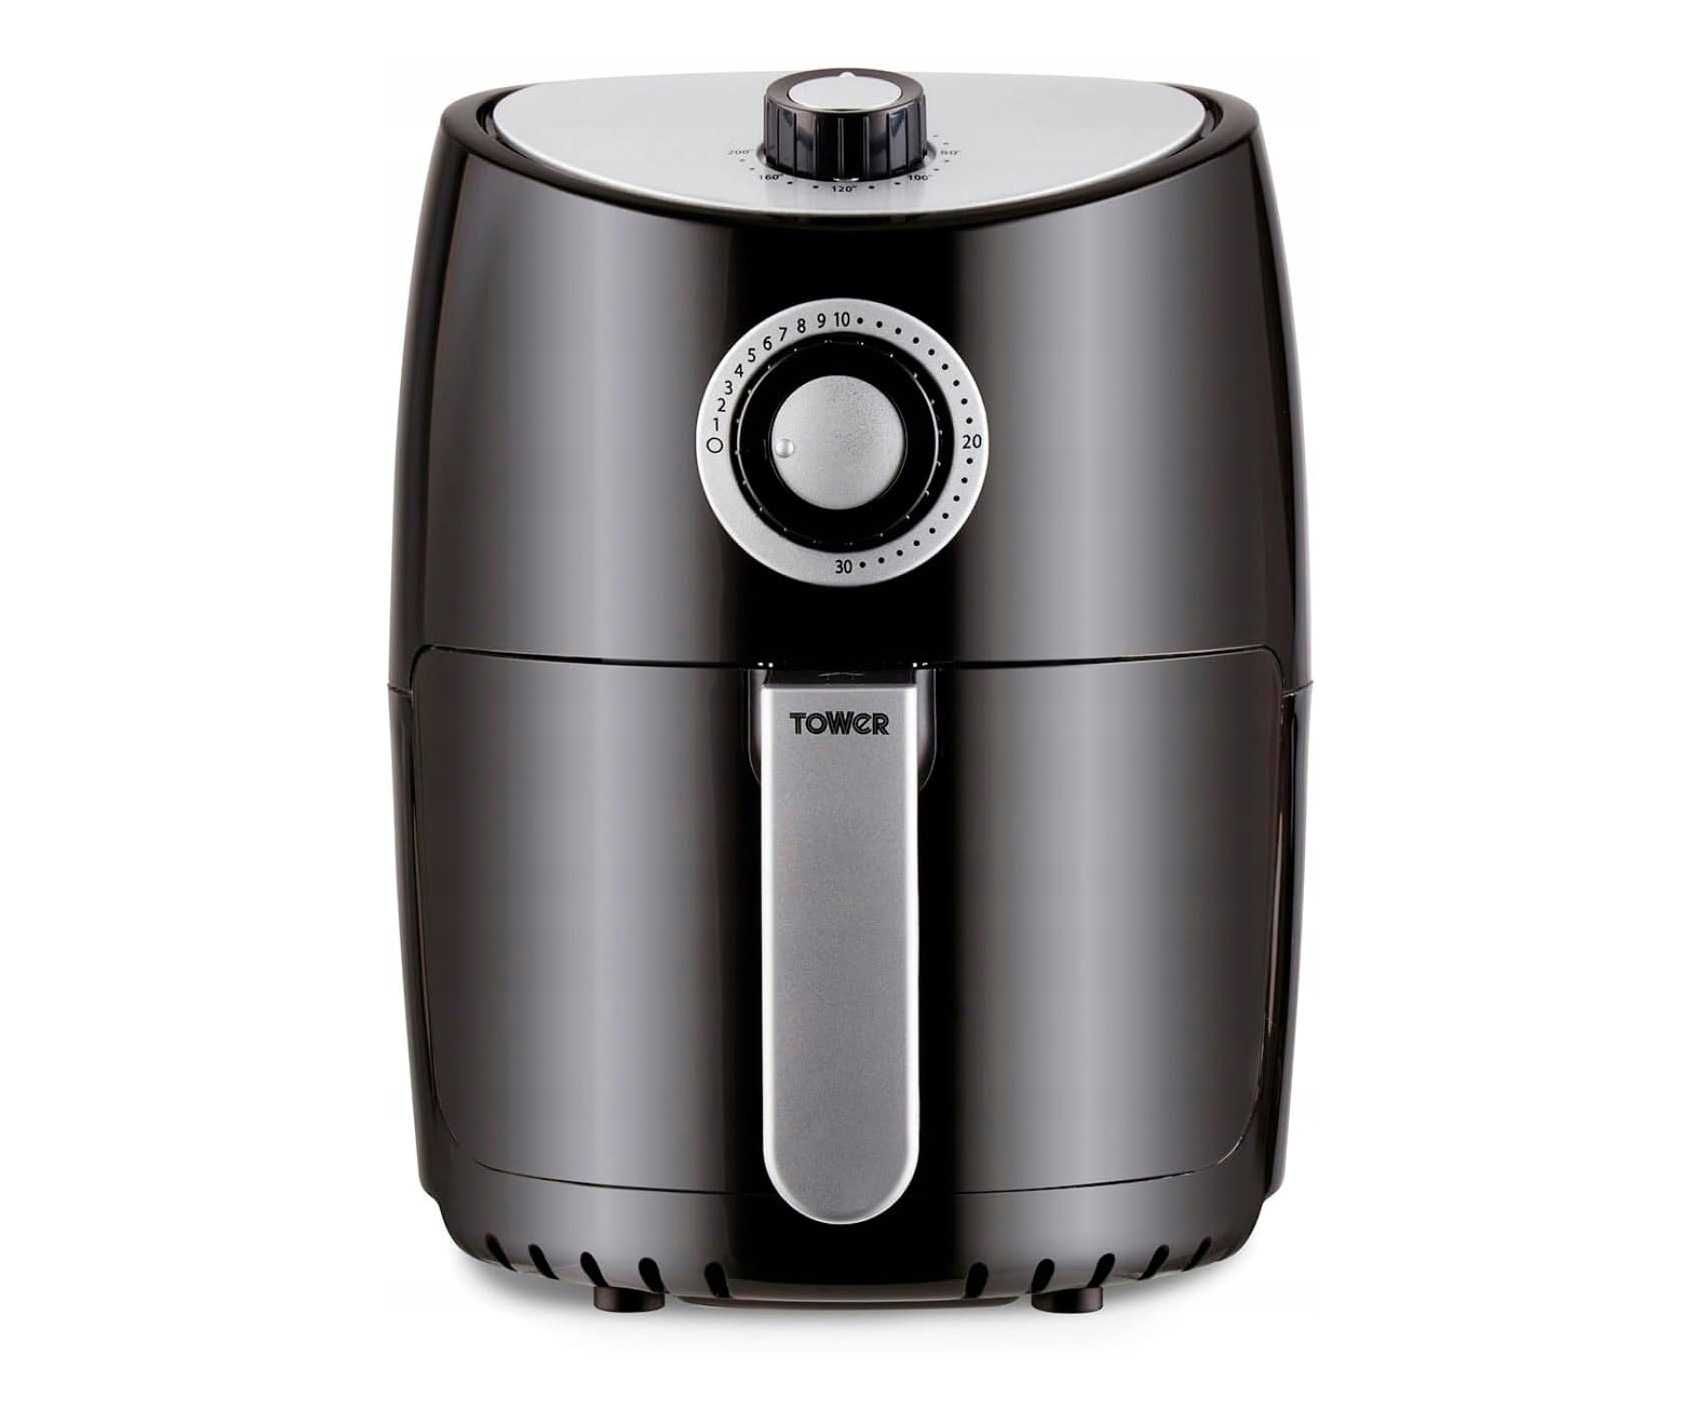 Frytkownica air fryer Tower T17023 VortX 1000 W